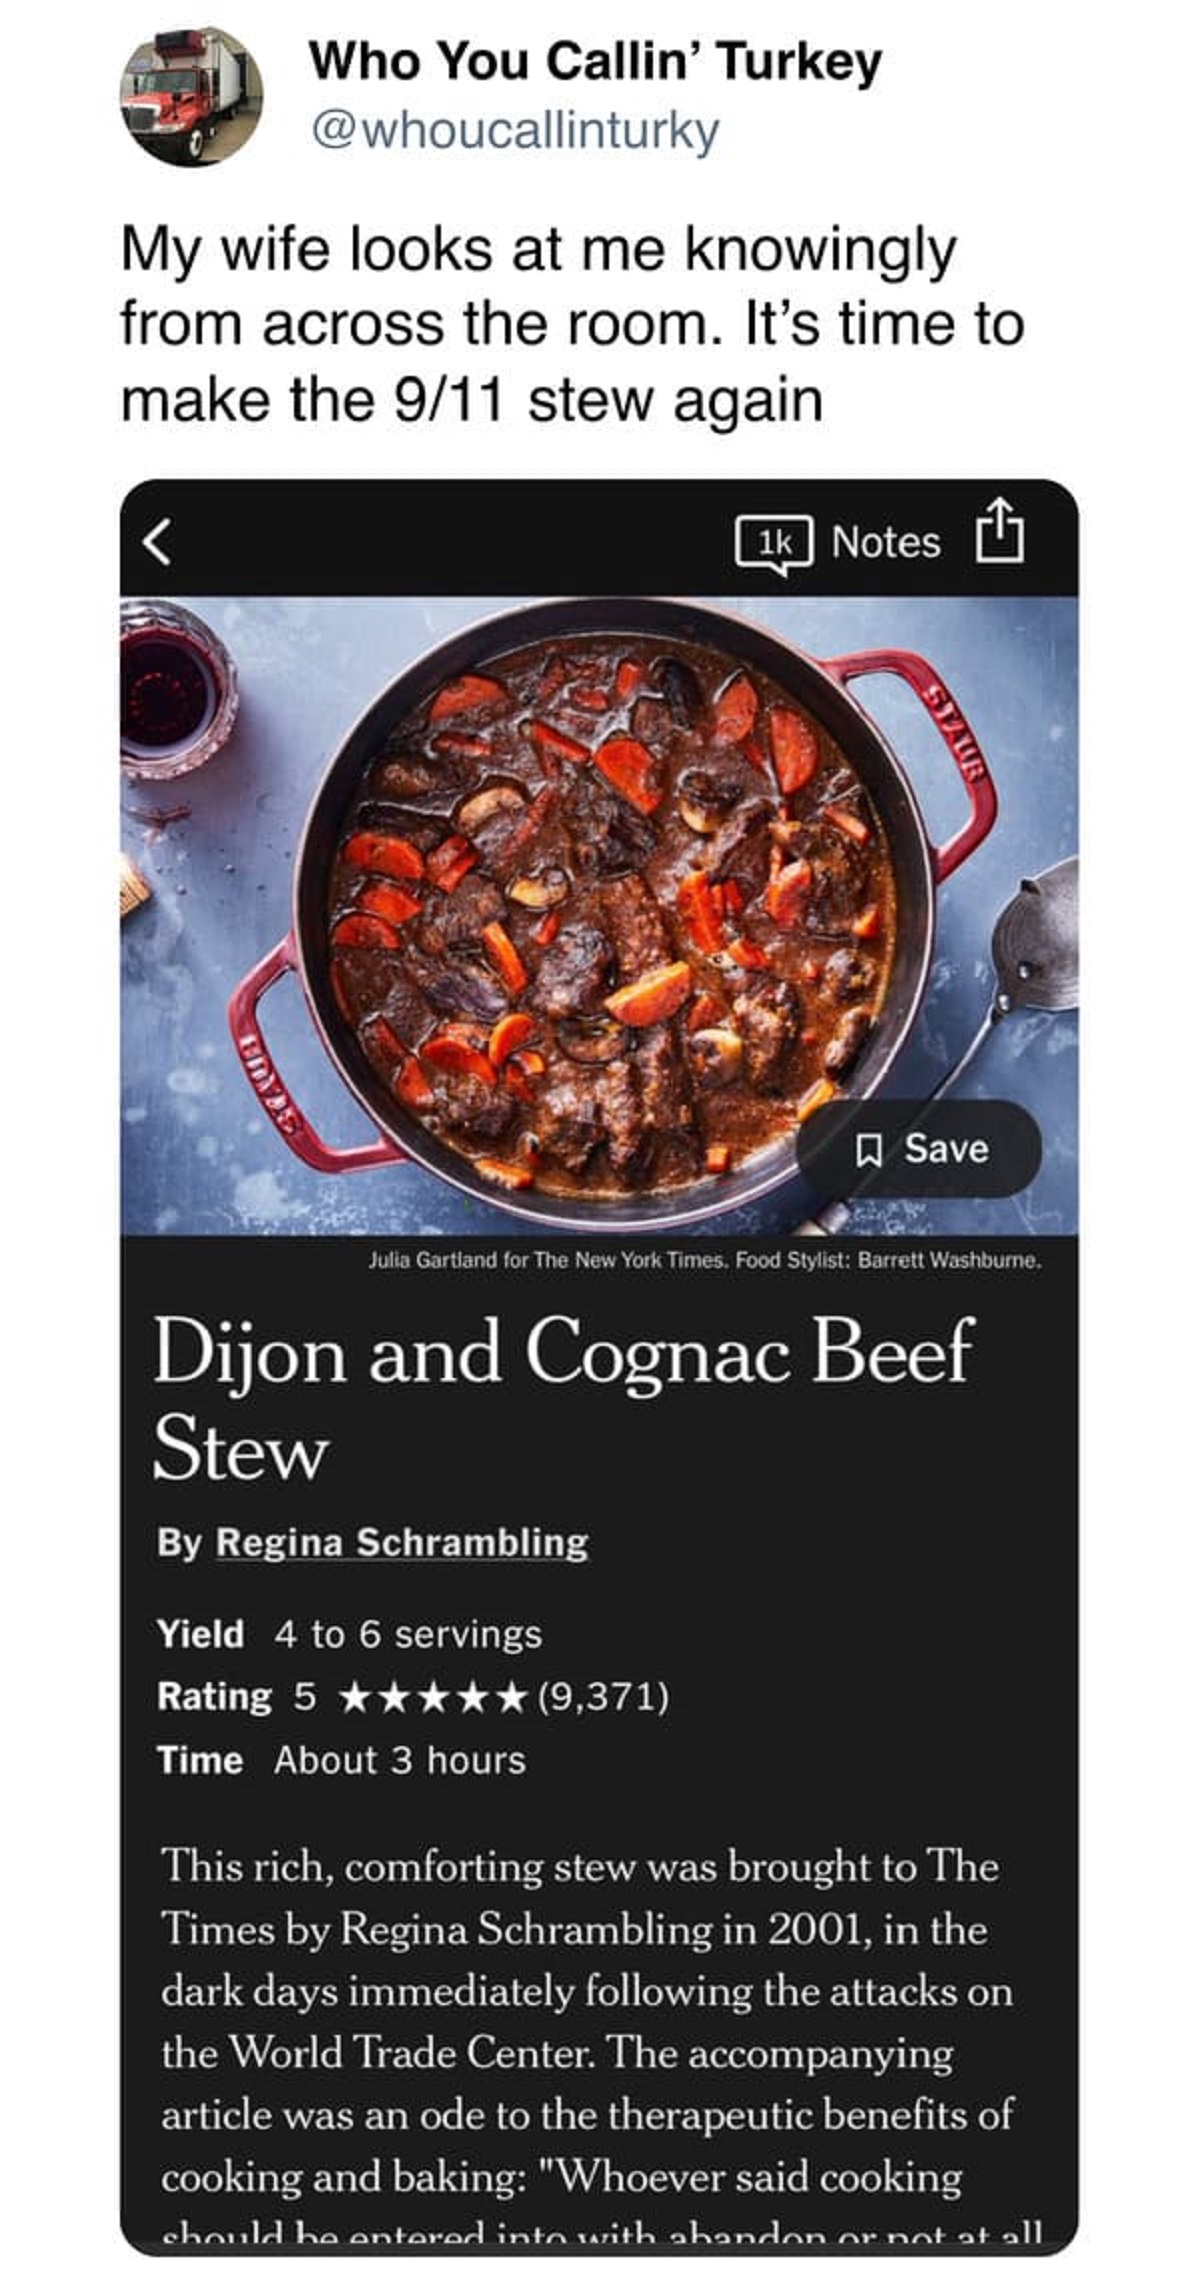 dish - Who You Callin' Turkey My wife looks at me knowingly from across the room. It's time to make the 911 stew again Learne Notes New Tood Sty Yield 4 to 6 servings Rating 5 9,371 Time About 3 hours Save Dijon and Cognac Beef Stew By Regina Schrambling 